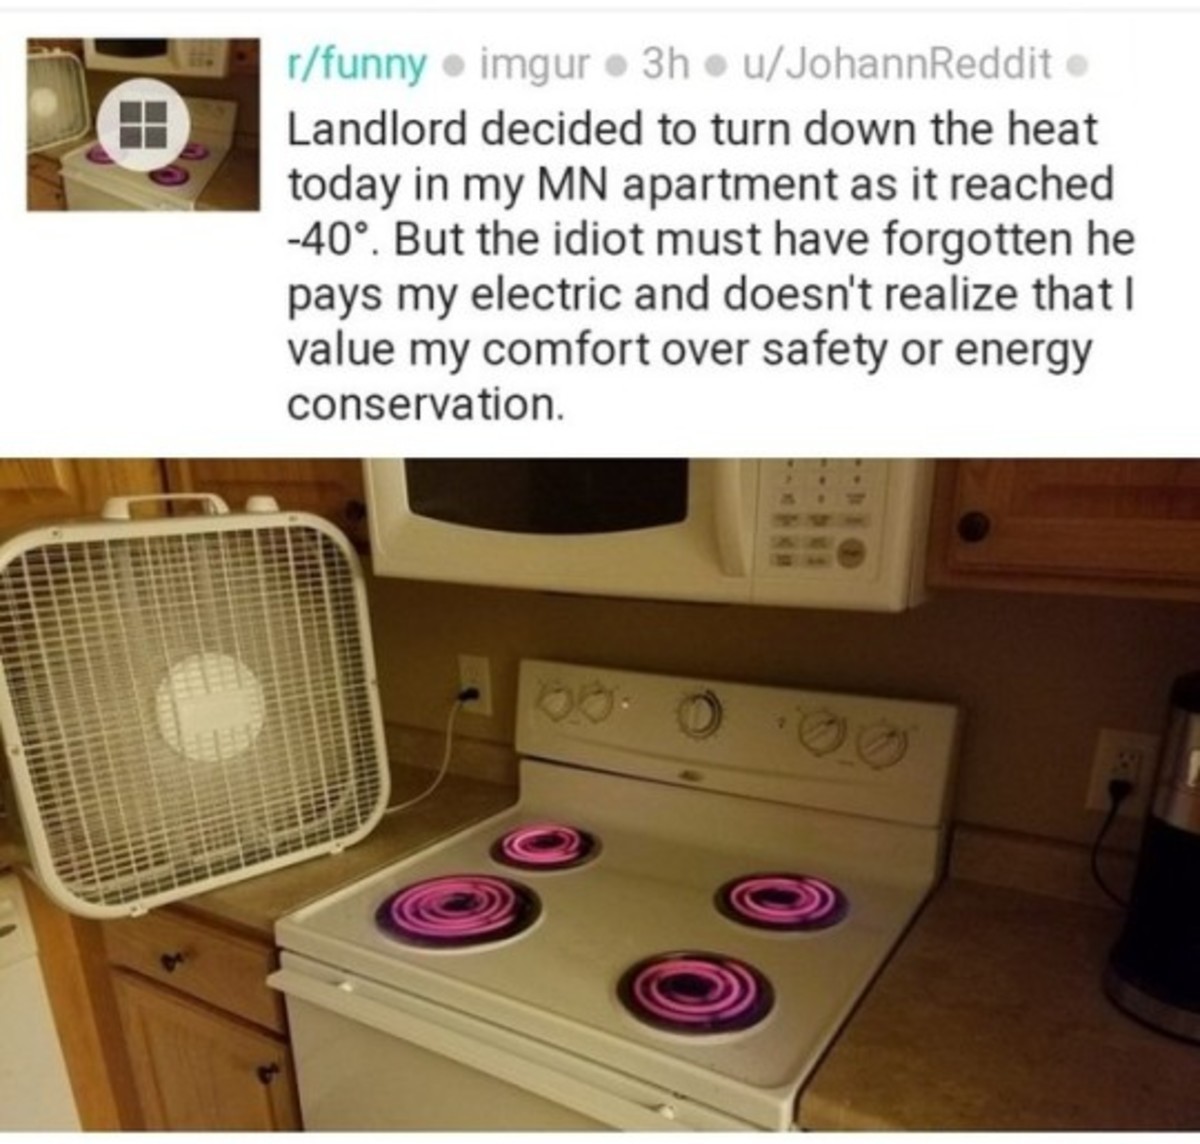 landlord meme heating - rfunny imgur 3huJohannReddit Landlord decided to turn down the heat today in my Mn apartment as it reached 40. But the idiot must have forgotten he pays my electric and doesn't realize that I value my comfort over safety or energy 